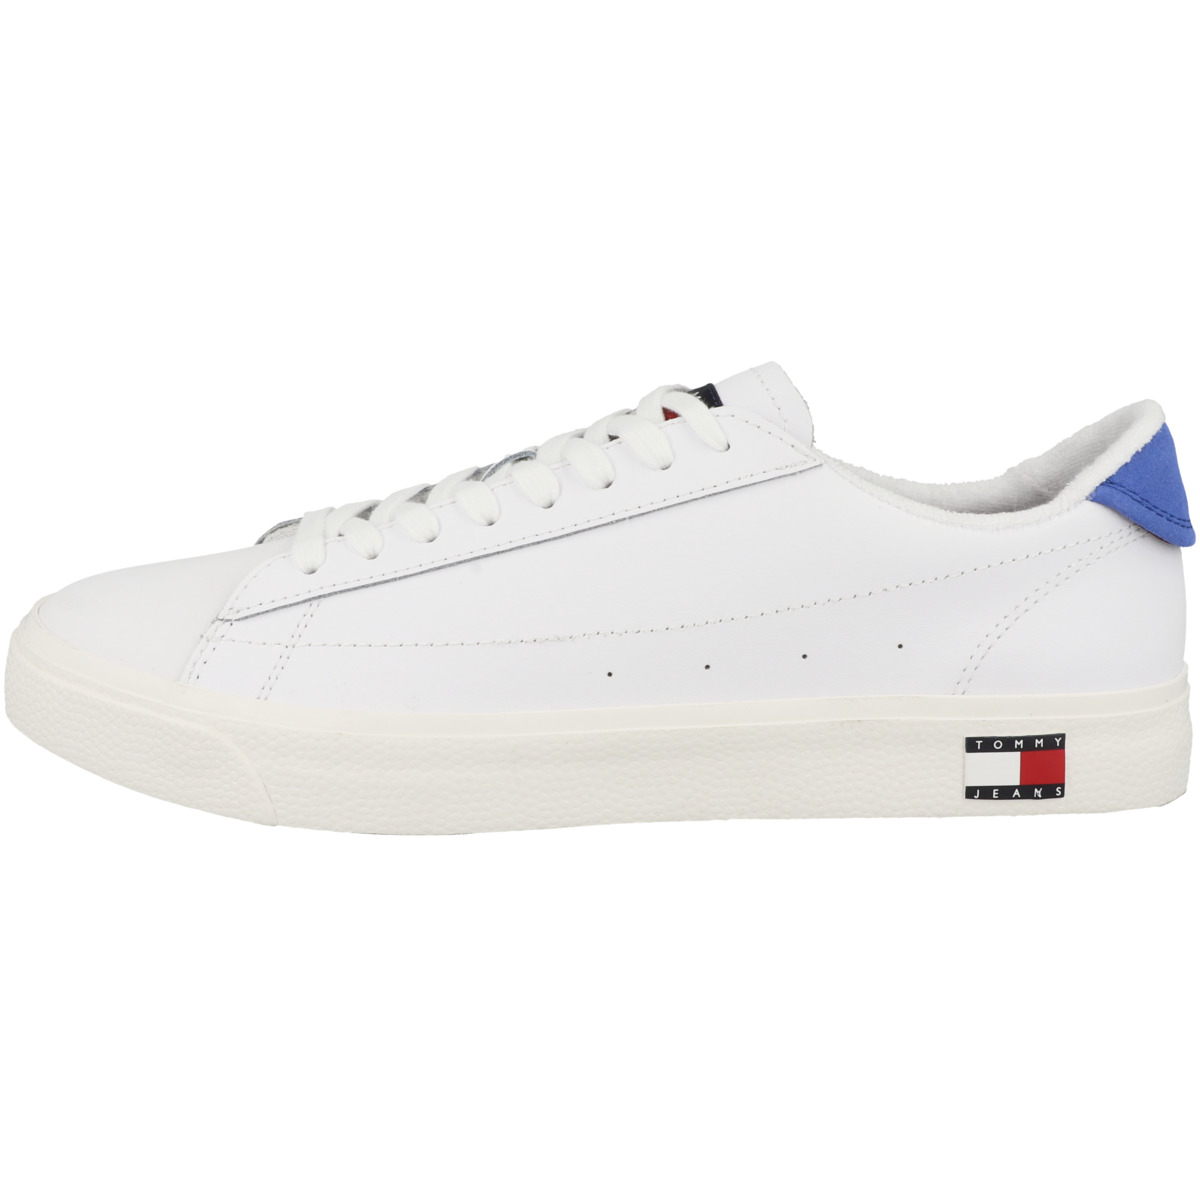 Низкие кроссовки Tommy Hilfiger low Tommy Jeans Leather Vulcanized, белый низкие кроссовки tommy hilfiger low tommy jeans lace up canvas color бежевый